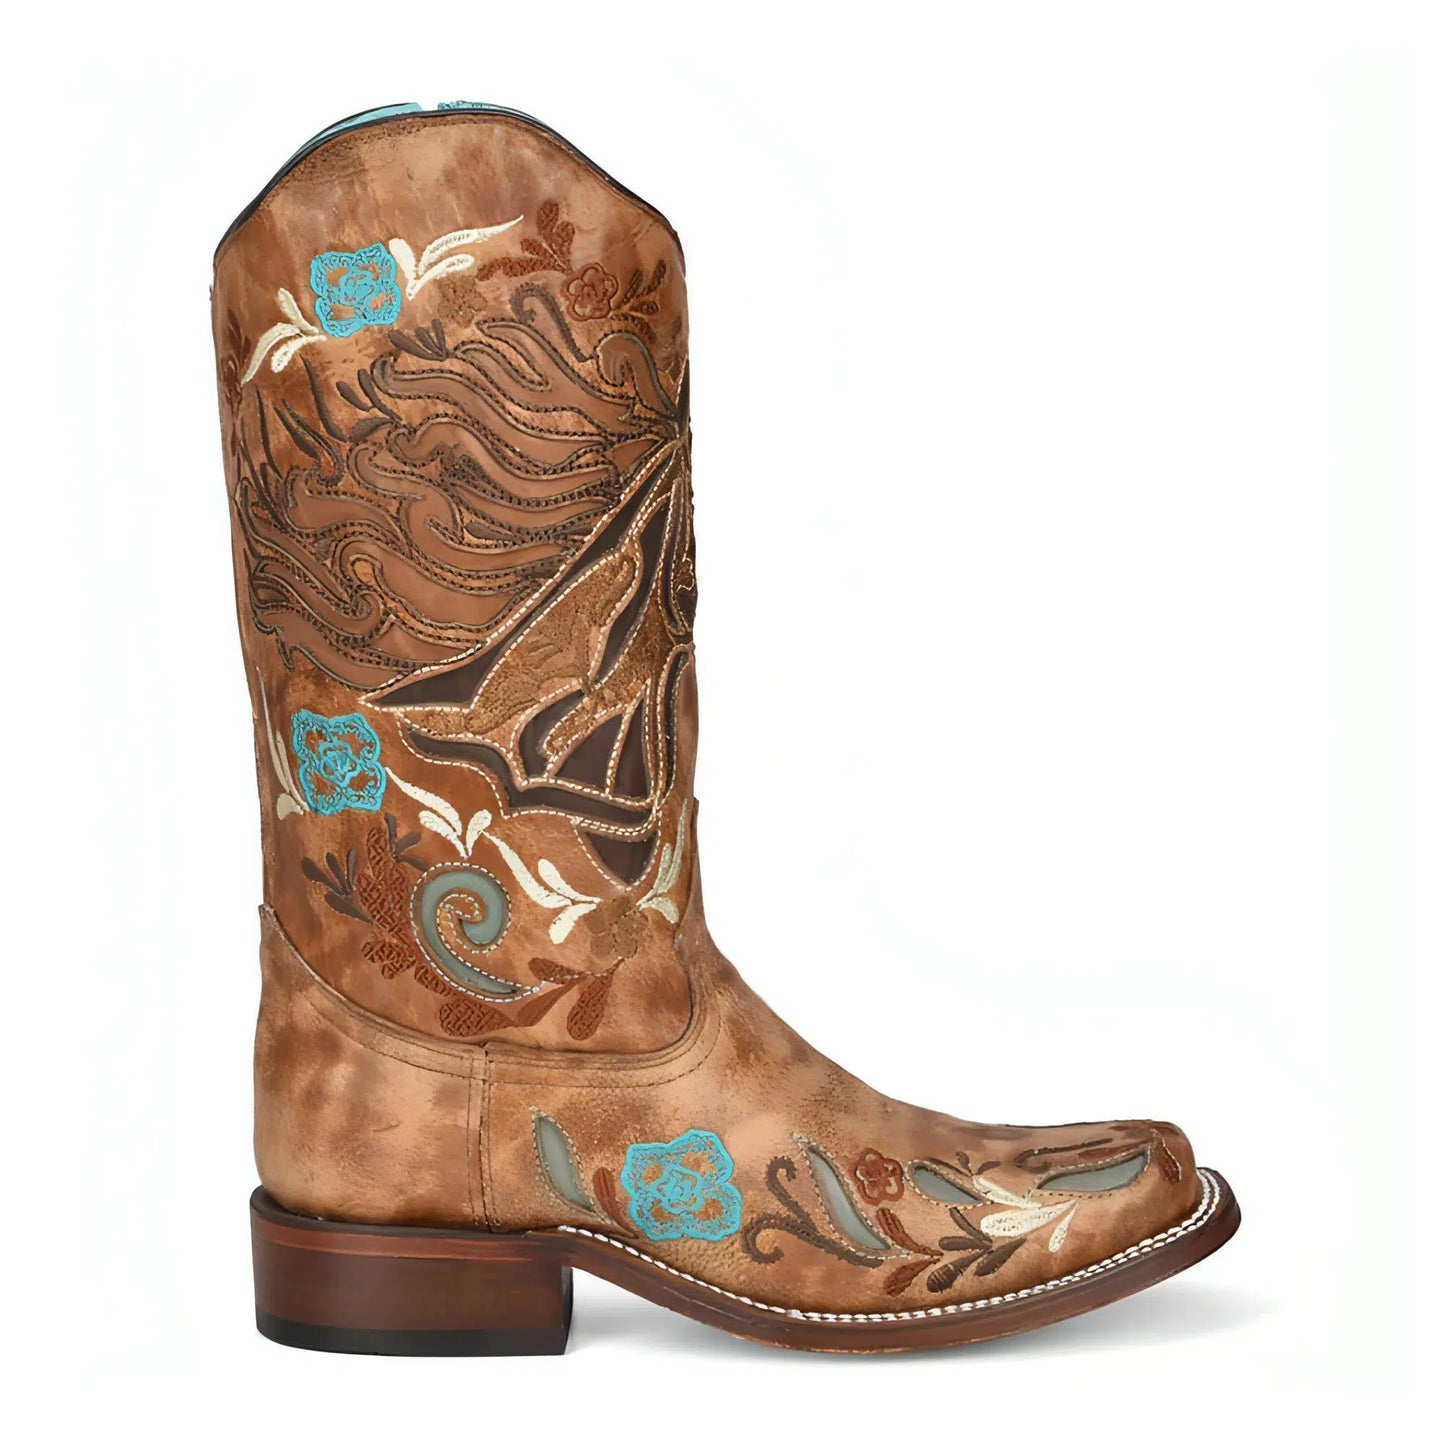 A4266 - M Corral brown western cowgirl leather boots for women